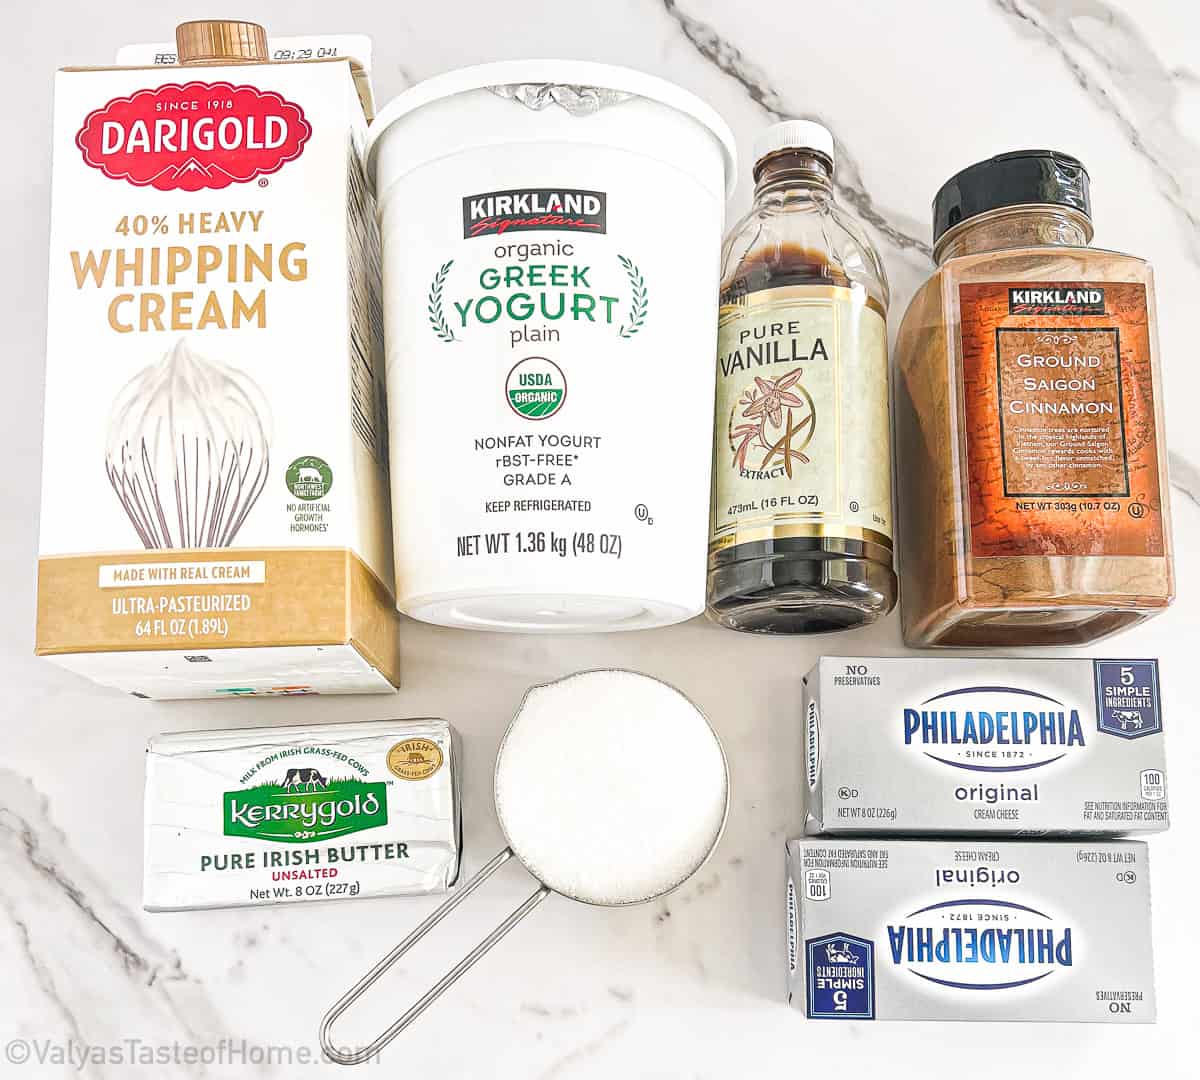 Ingredients on how to make cake frosting for the Simple Carrot Walnut Cake Recipe